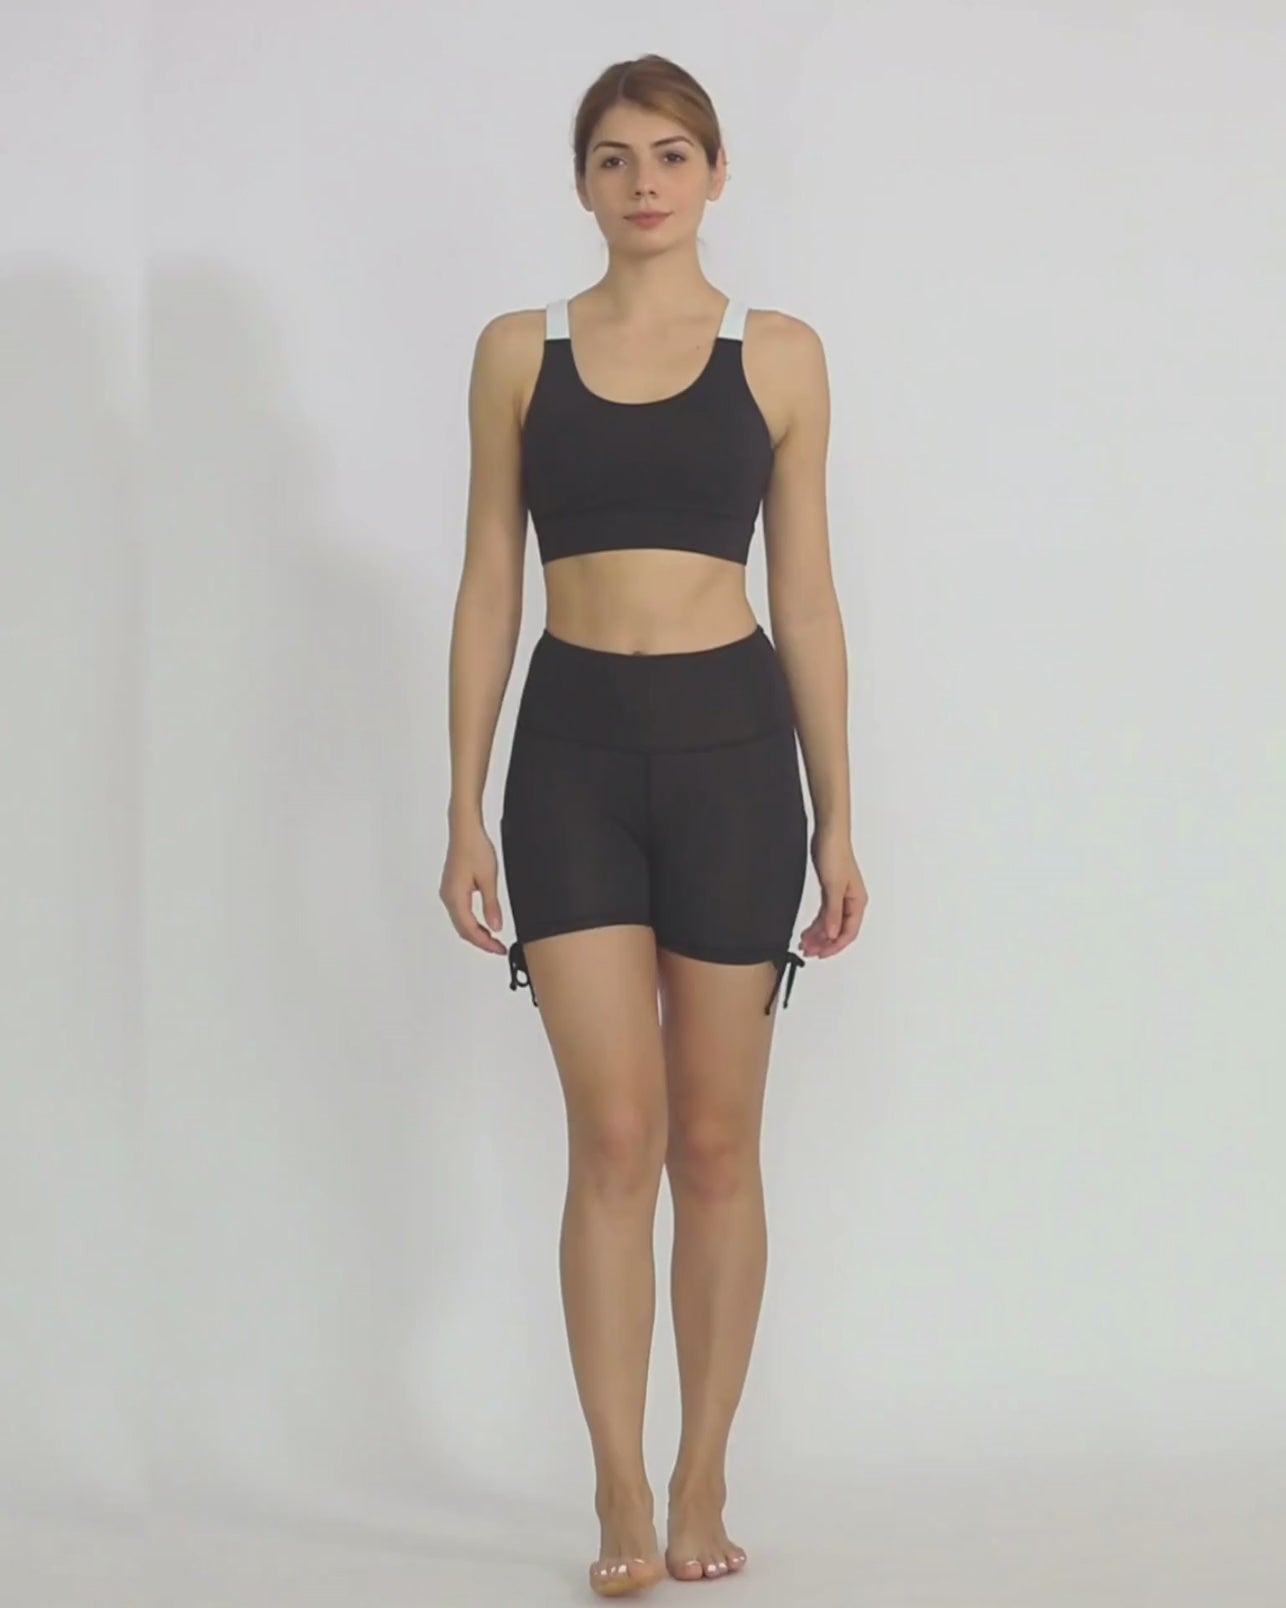 Black Yoga shorts and sports bra co-ord set by kosha yoga co from recycled materials